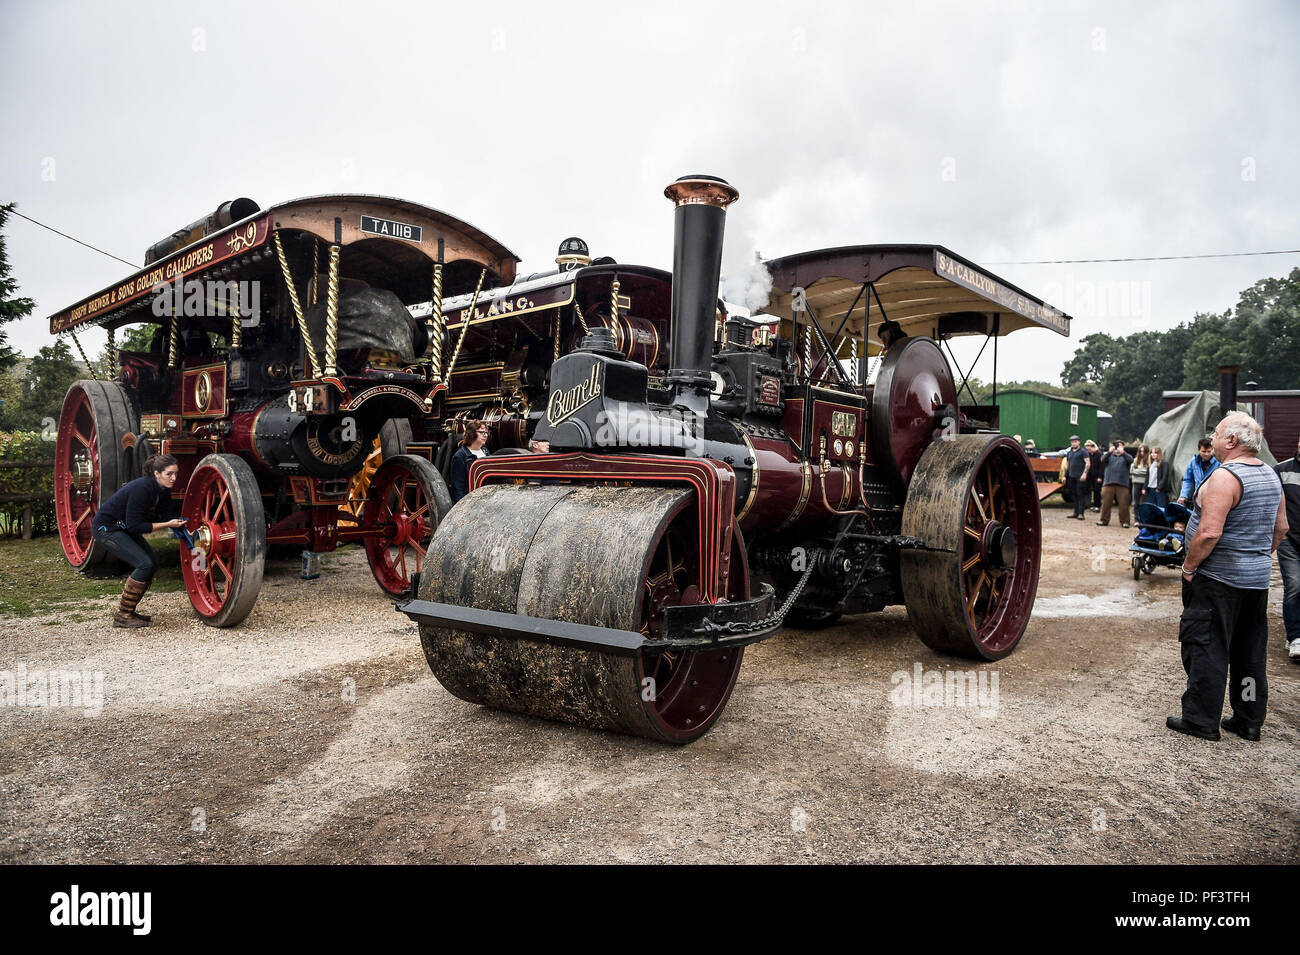 A Burrell Road Roller heads off after hundreds of steam enthusiasts gather at a pub in Dorset prior to making their way to the Great Dorset Steam Fair, where hundreds of period steam traction engines and heavy mechanical equipment from all eras gather for the annual show on 23 to 27 August 2018, to celebrate 50 years. Stock Photo